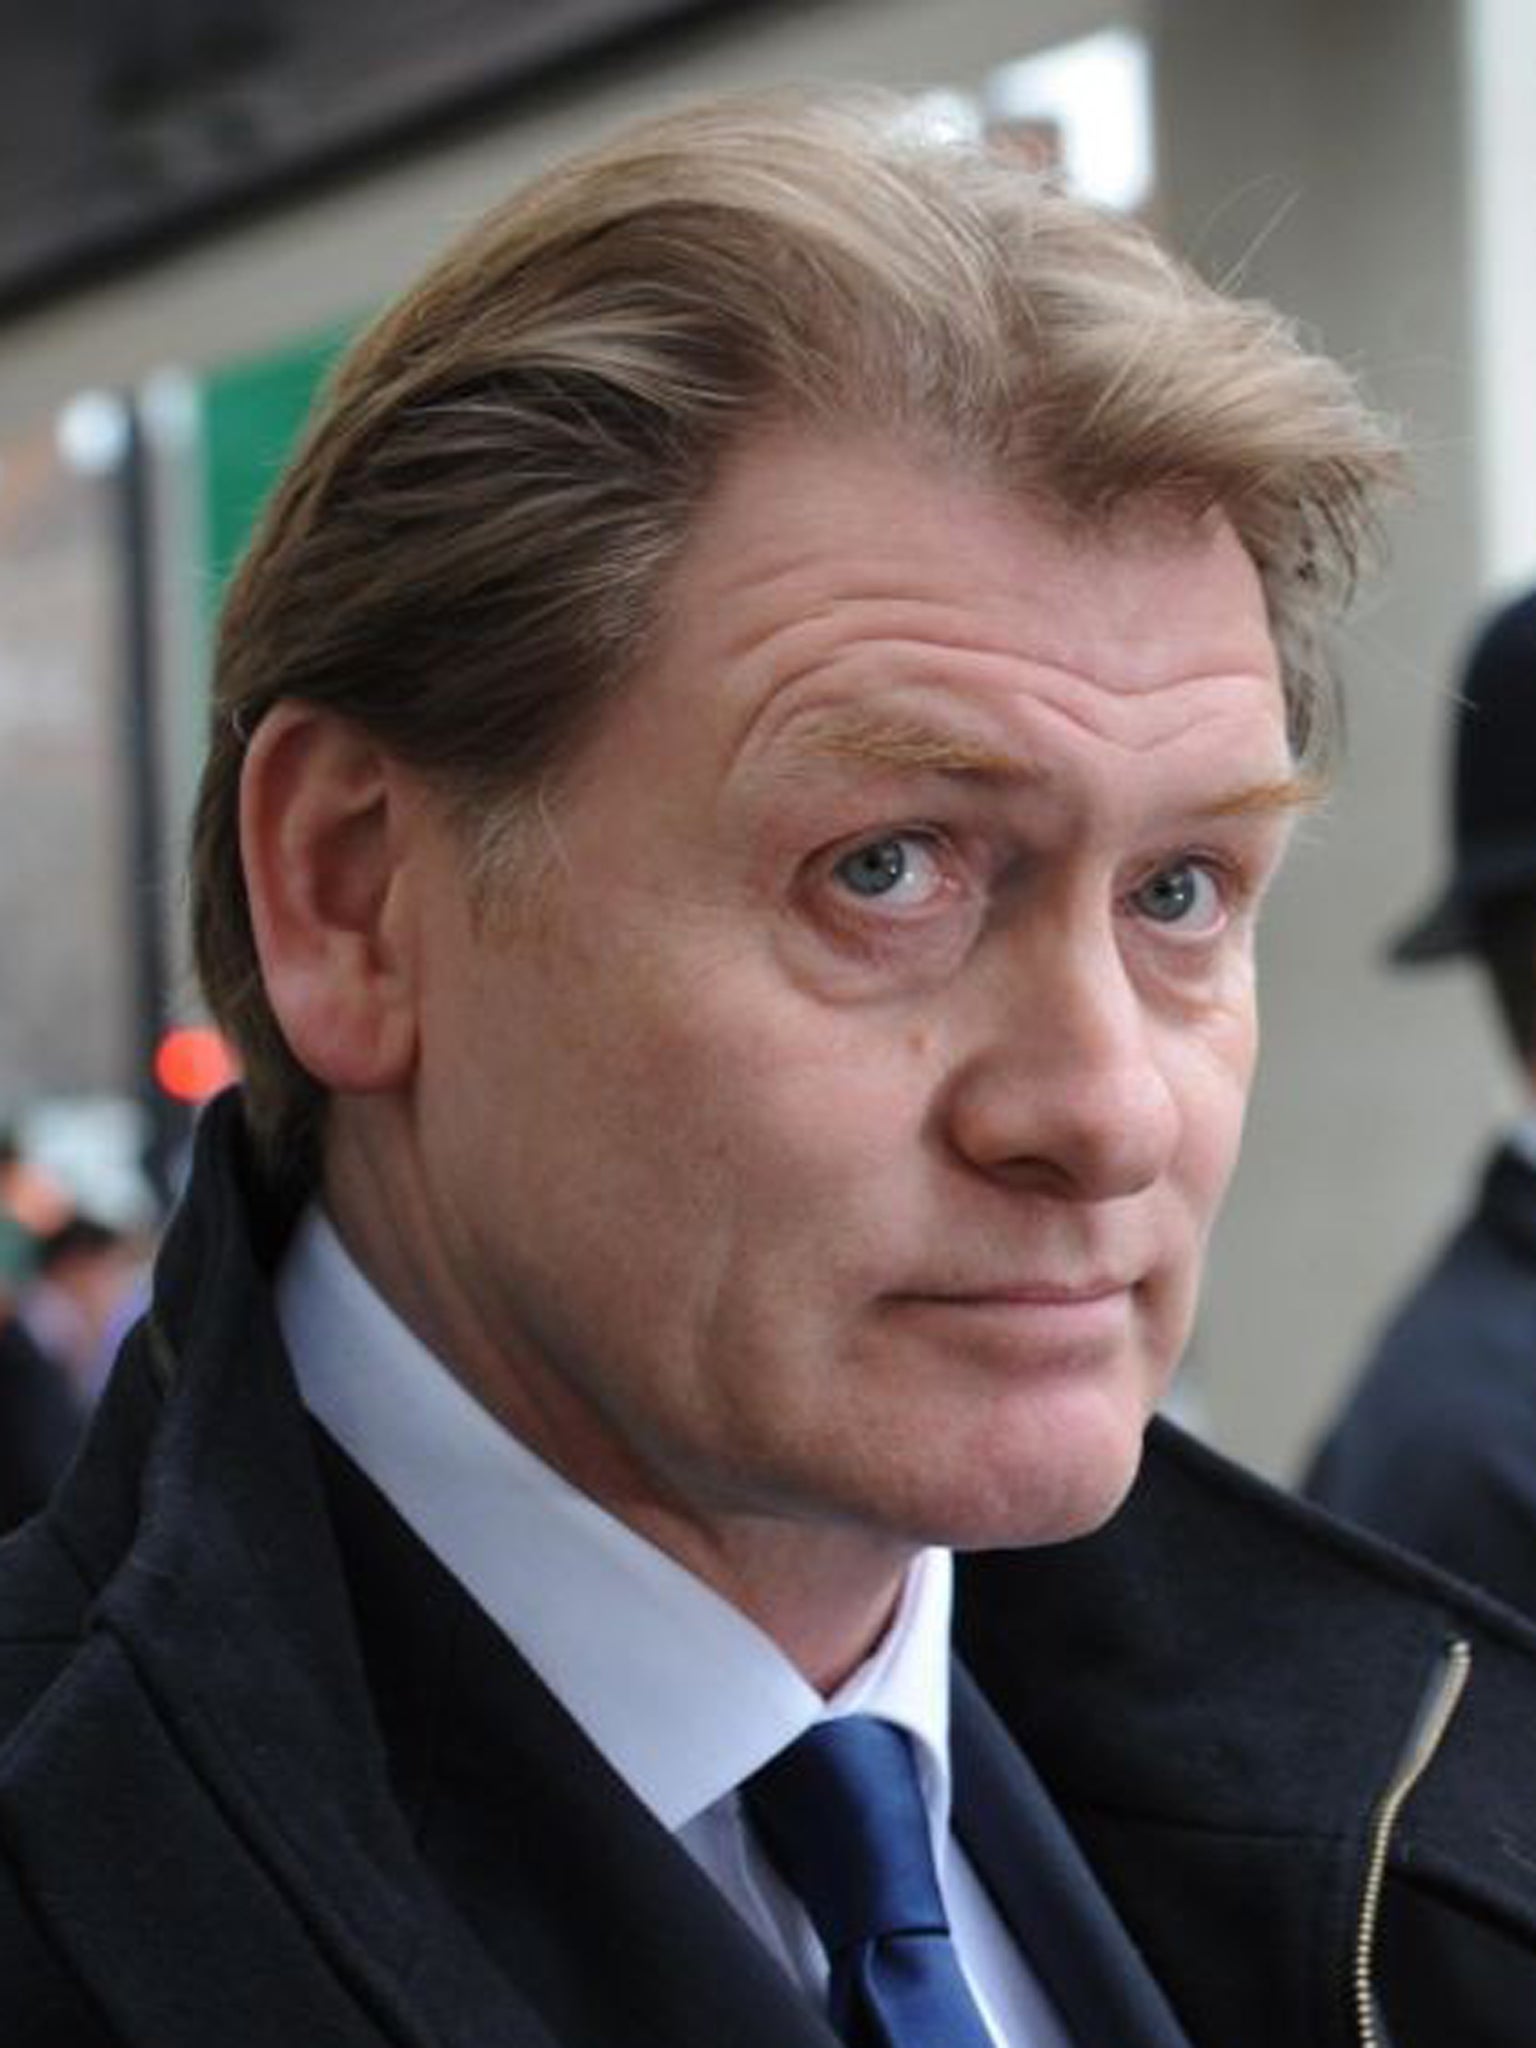 Eric Joyce was arrested at the House of Commons on 14 March